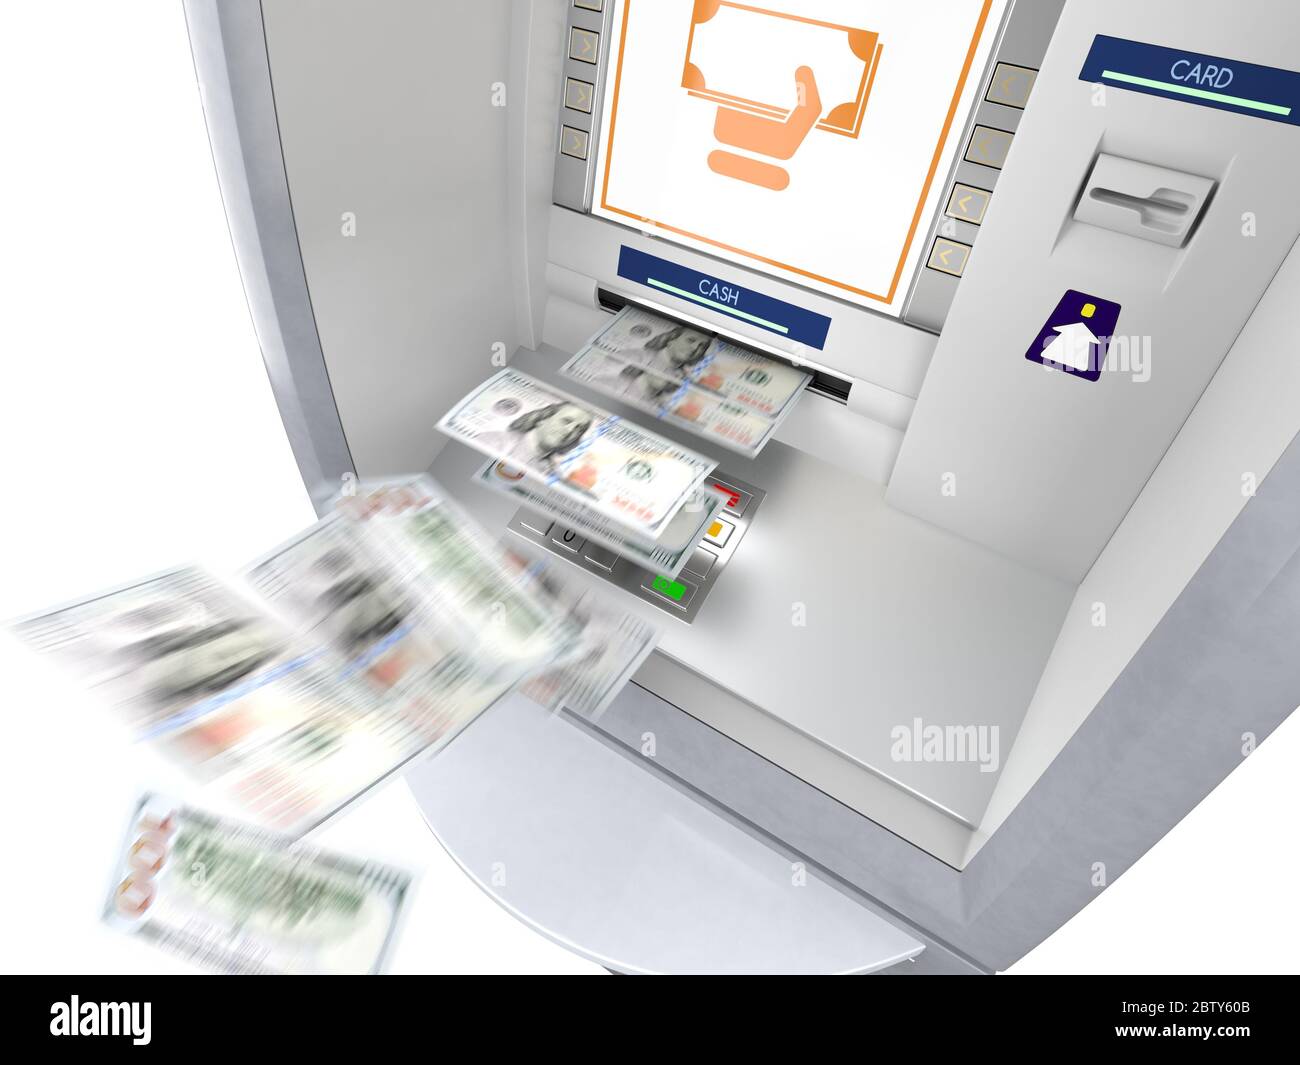 ATM machine, banknotes flying out Stock Photo